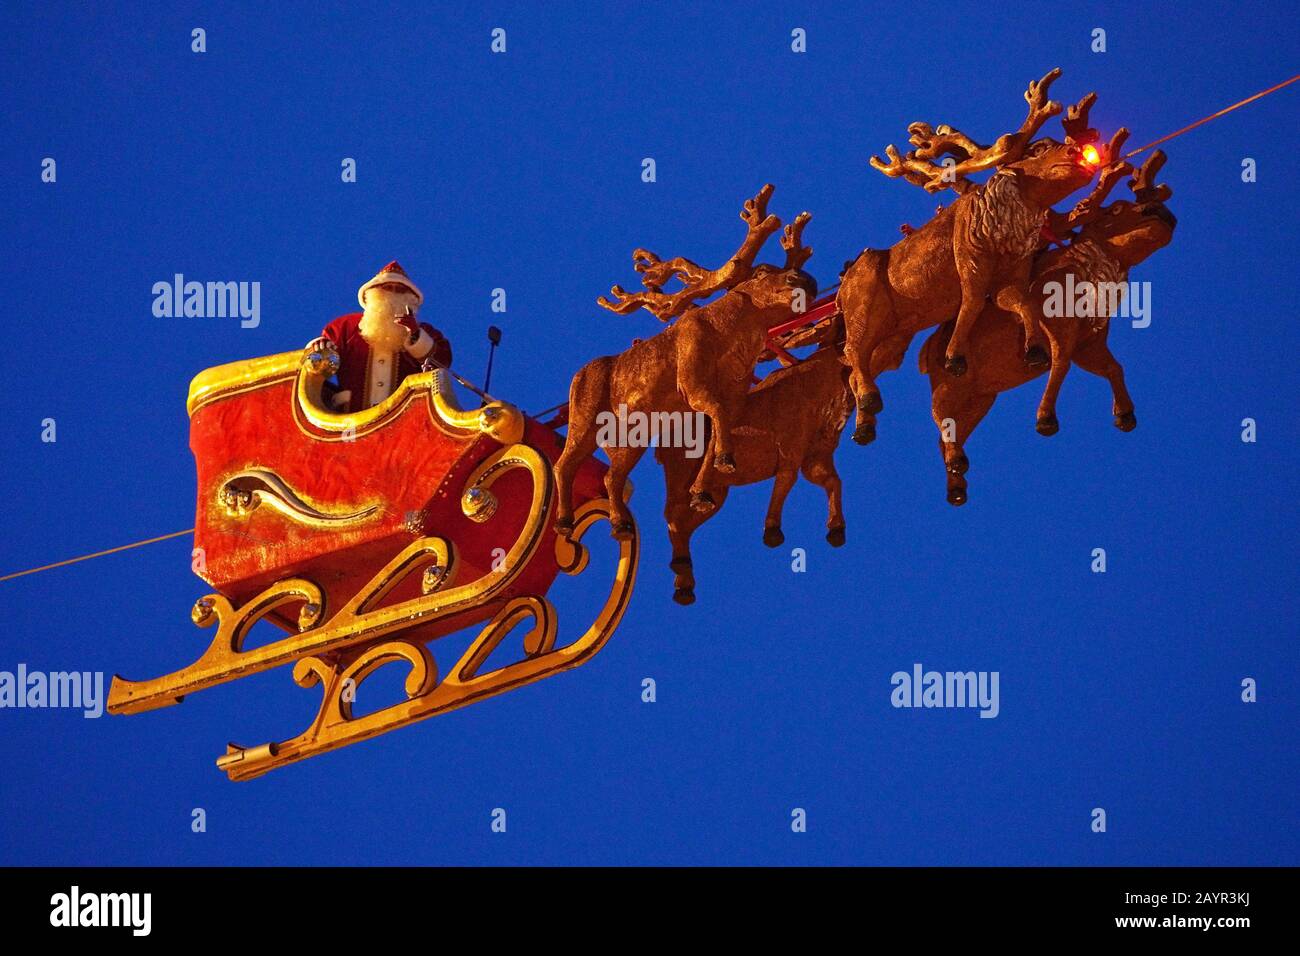 Santa Claus and his flying reindeers, who pull his sleigh on the Bochum Christmas market, Germany, North Rhine-Westphalia, Ruhr Area, Bochum Stock Photo